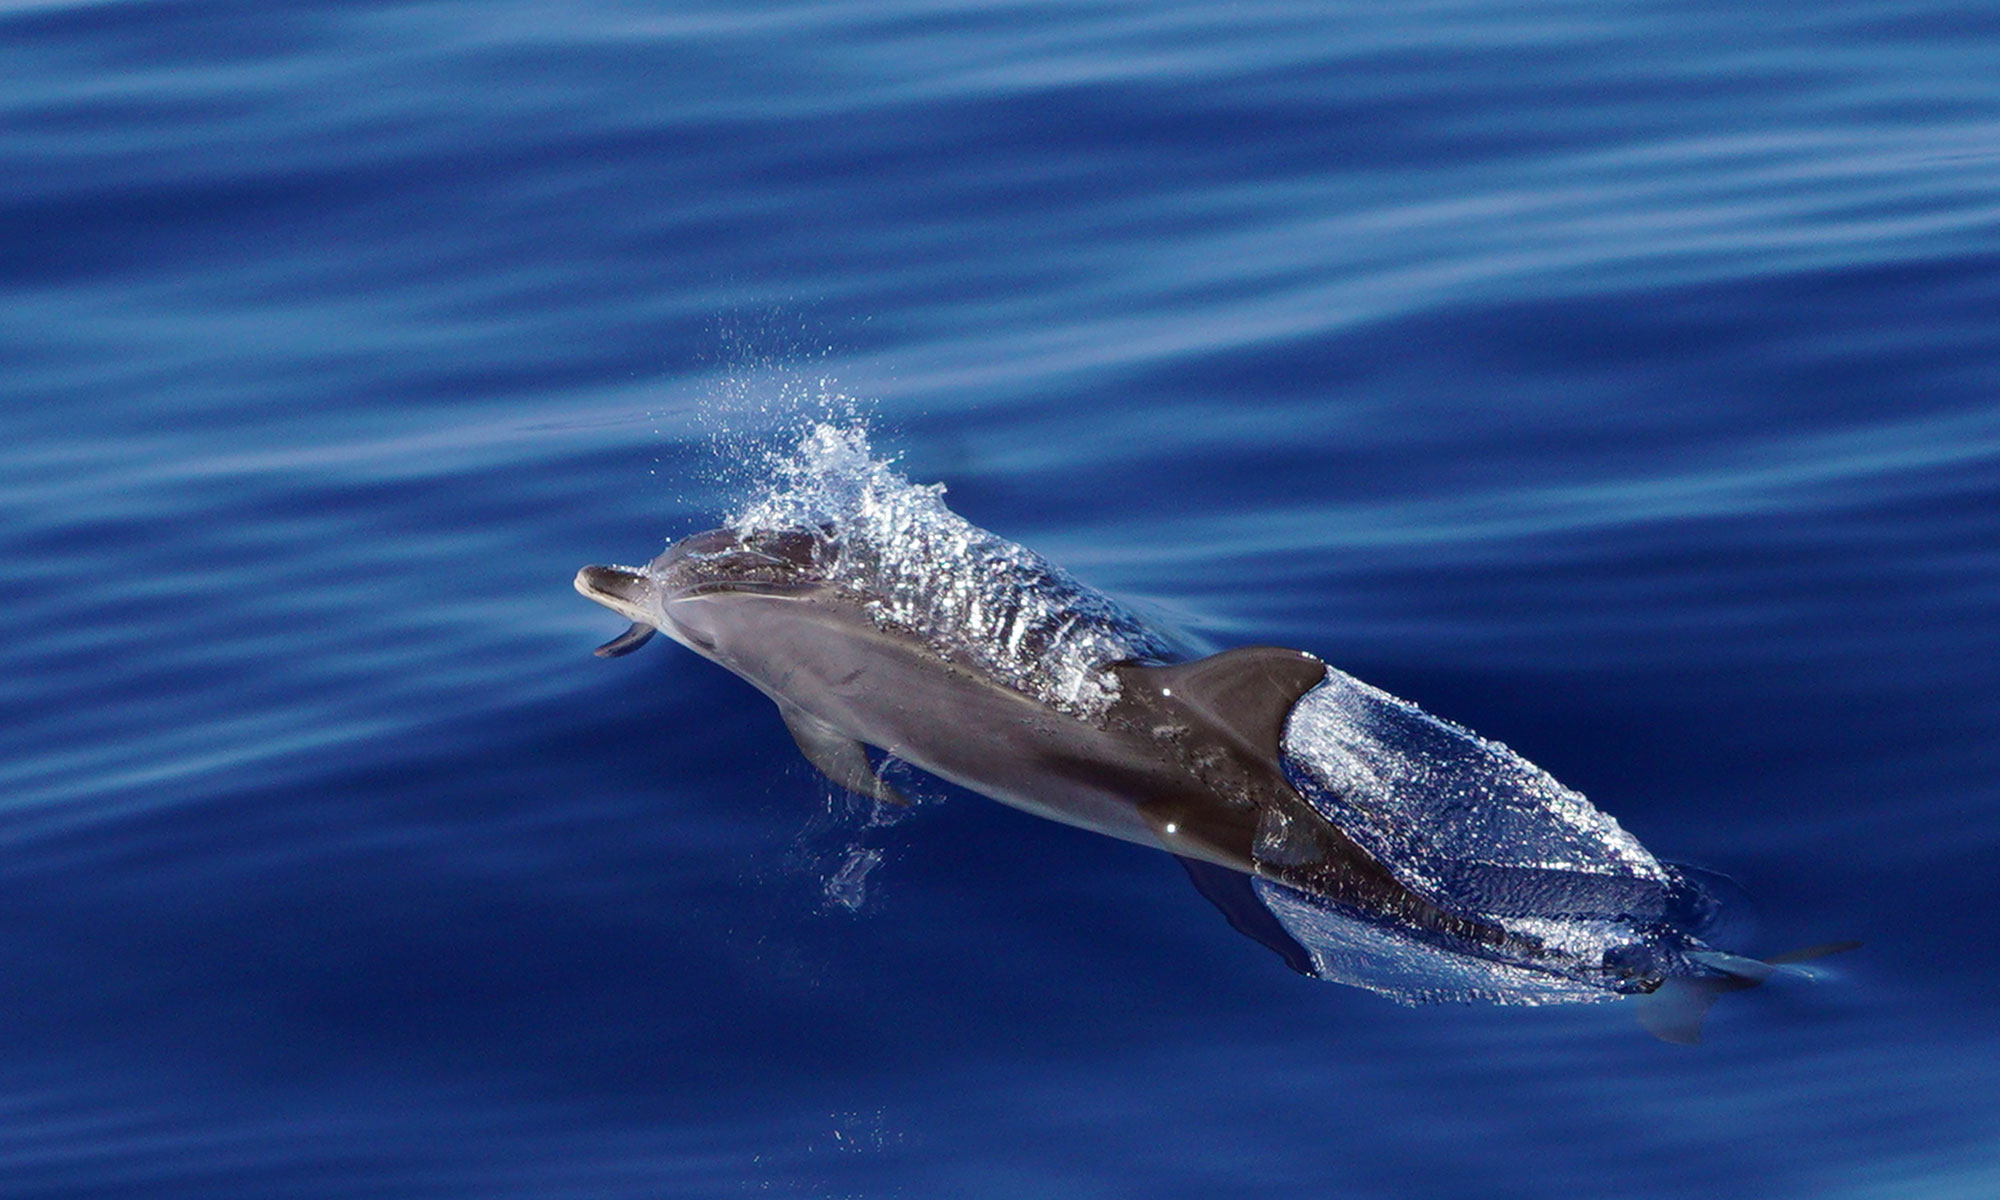 During the month of August we saw many pods of Spotted dolphins.